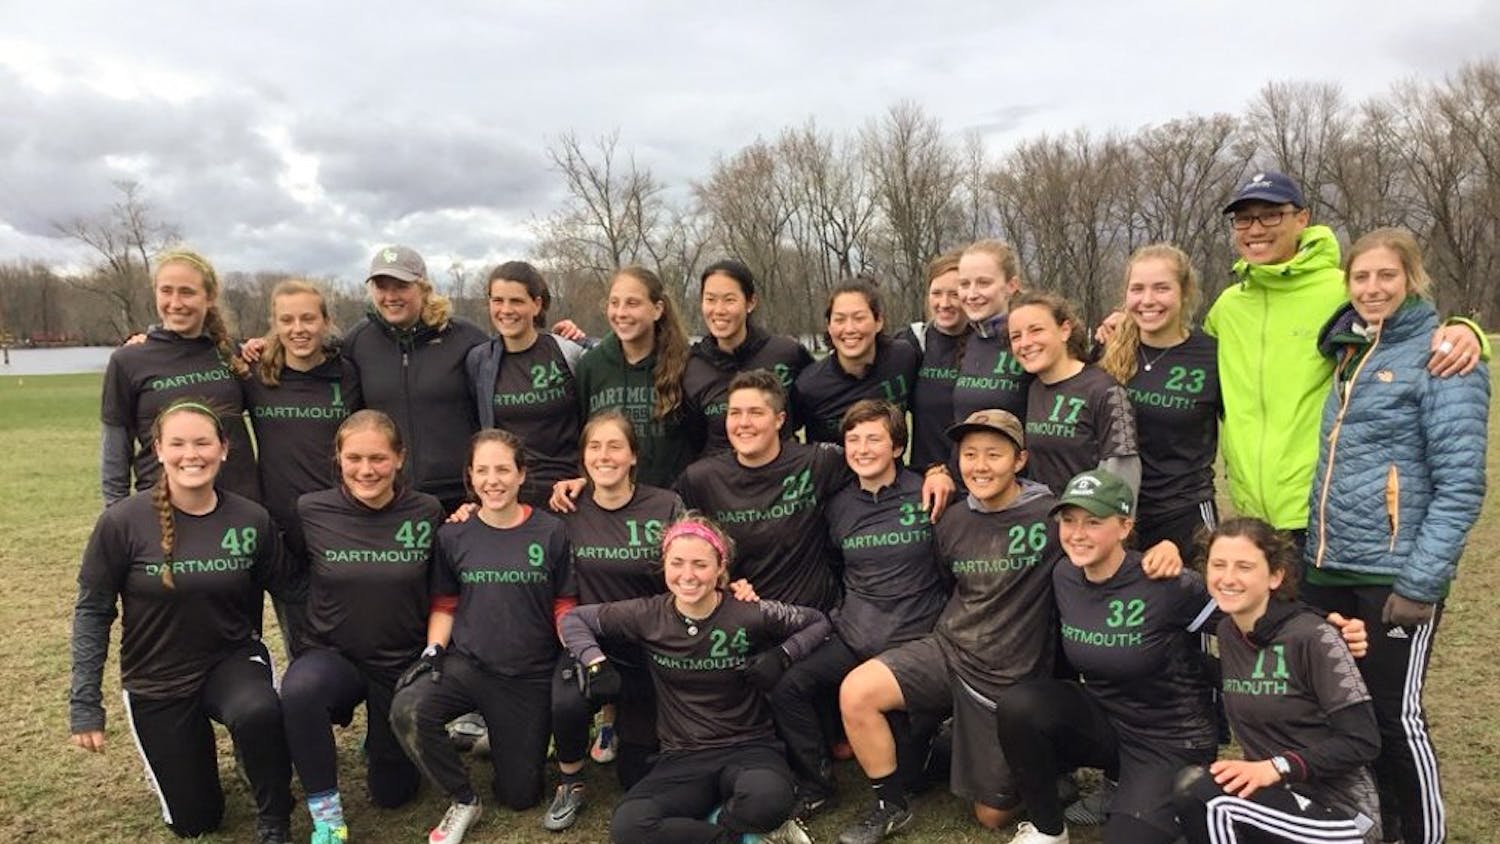 Last year, the women’s ultimate frisbee A team earned the title of USA Ultimate College Division I champions after defeating the University of Texas 15-9.